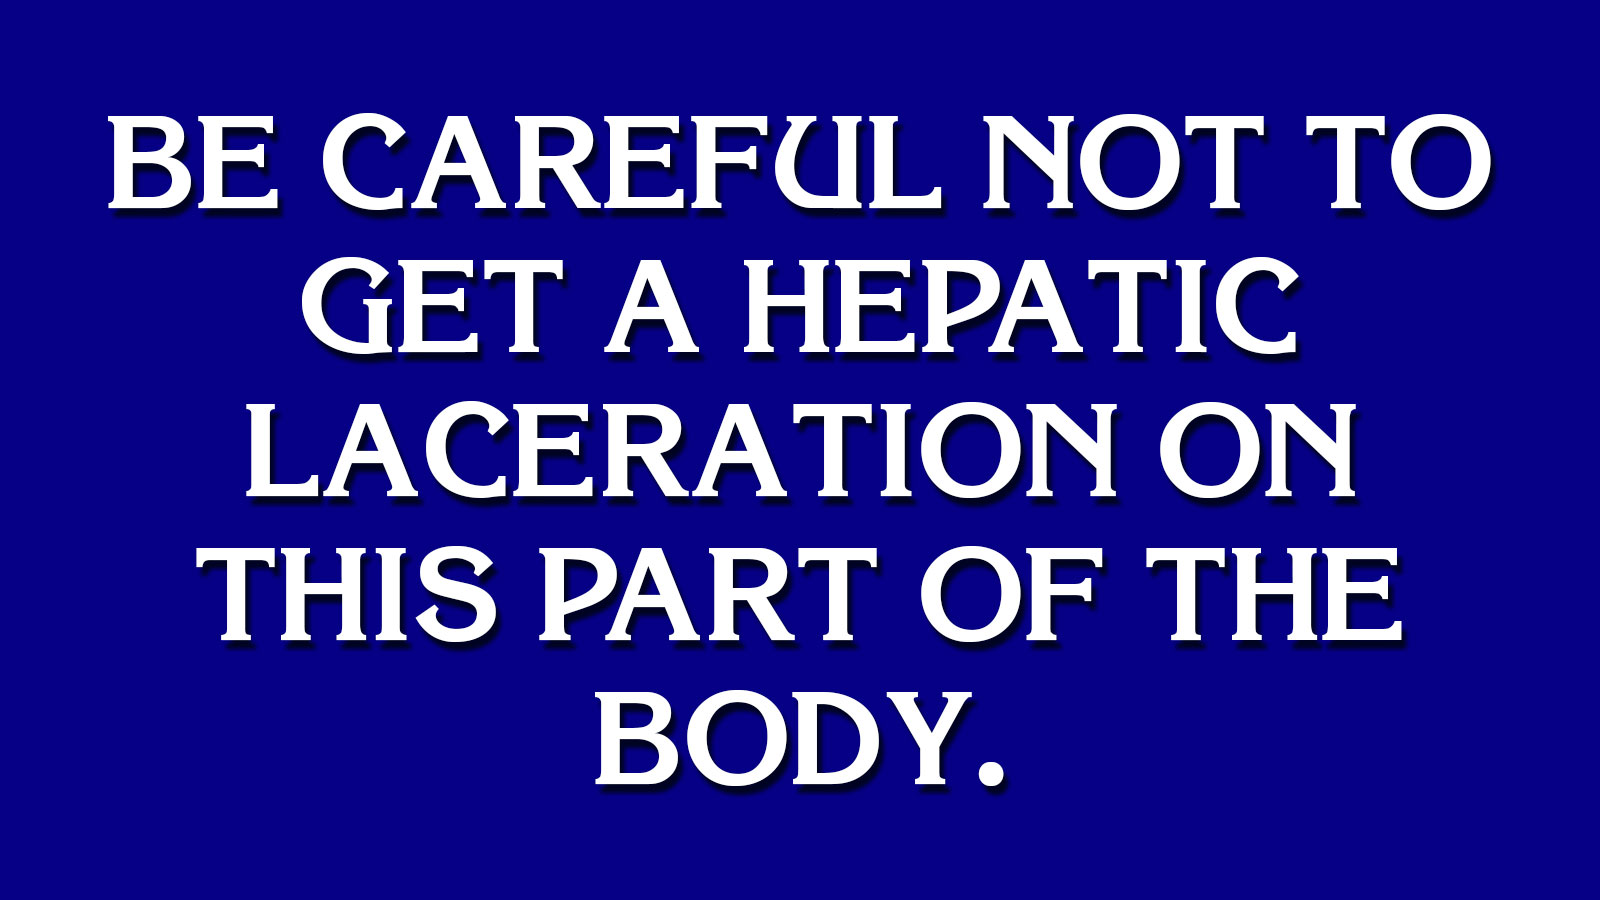 Are You Smarter Than a “Jeopardy!” Contestant? 15